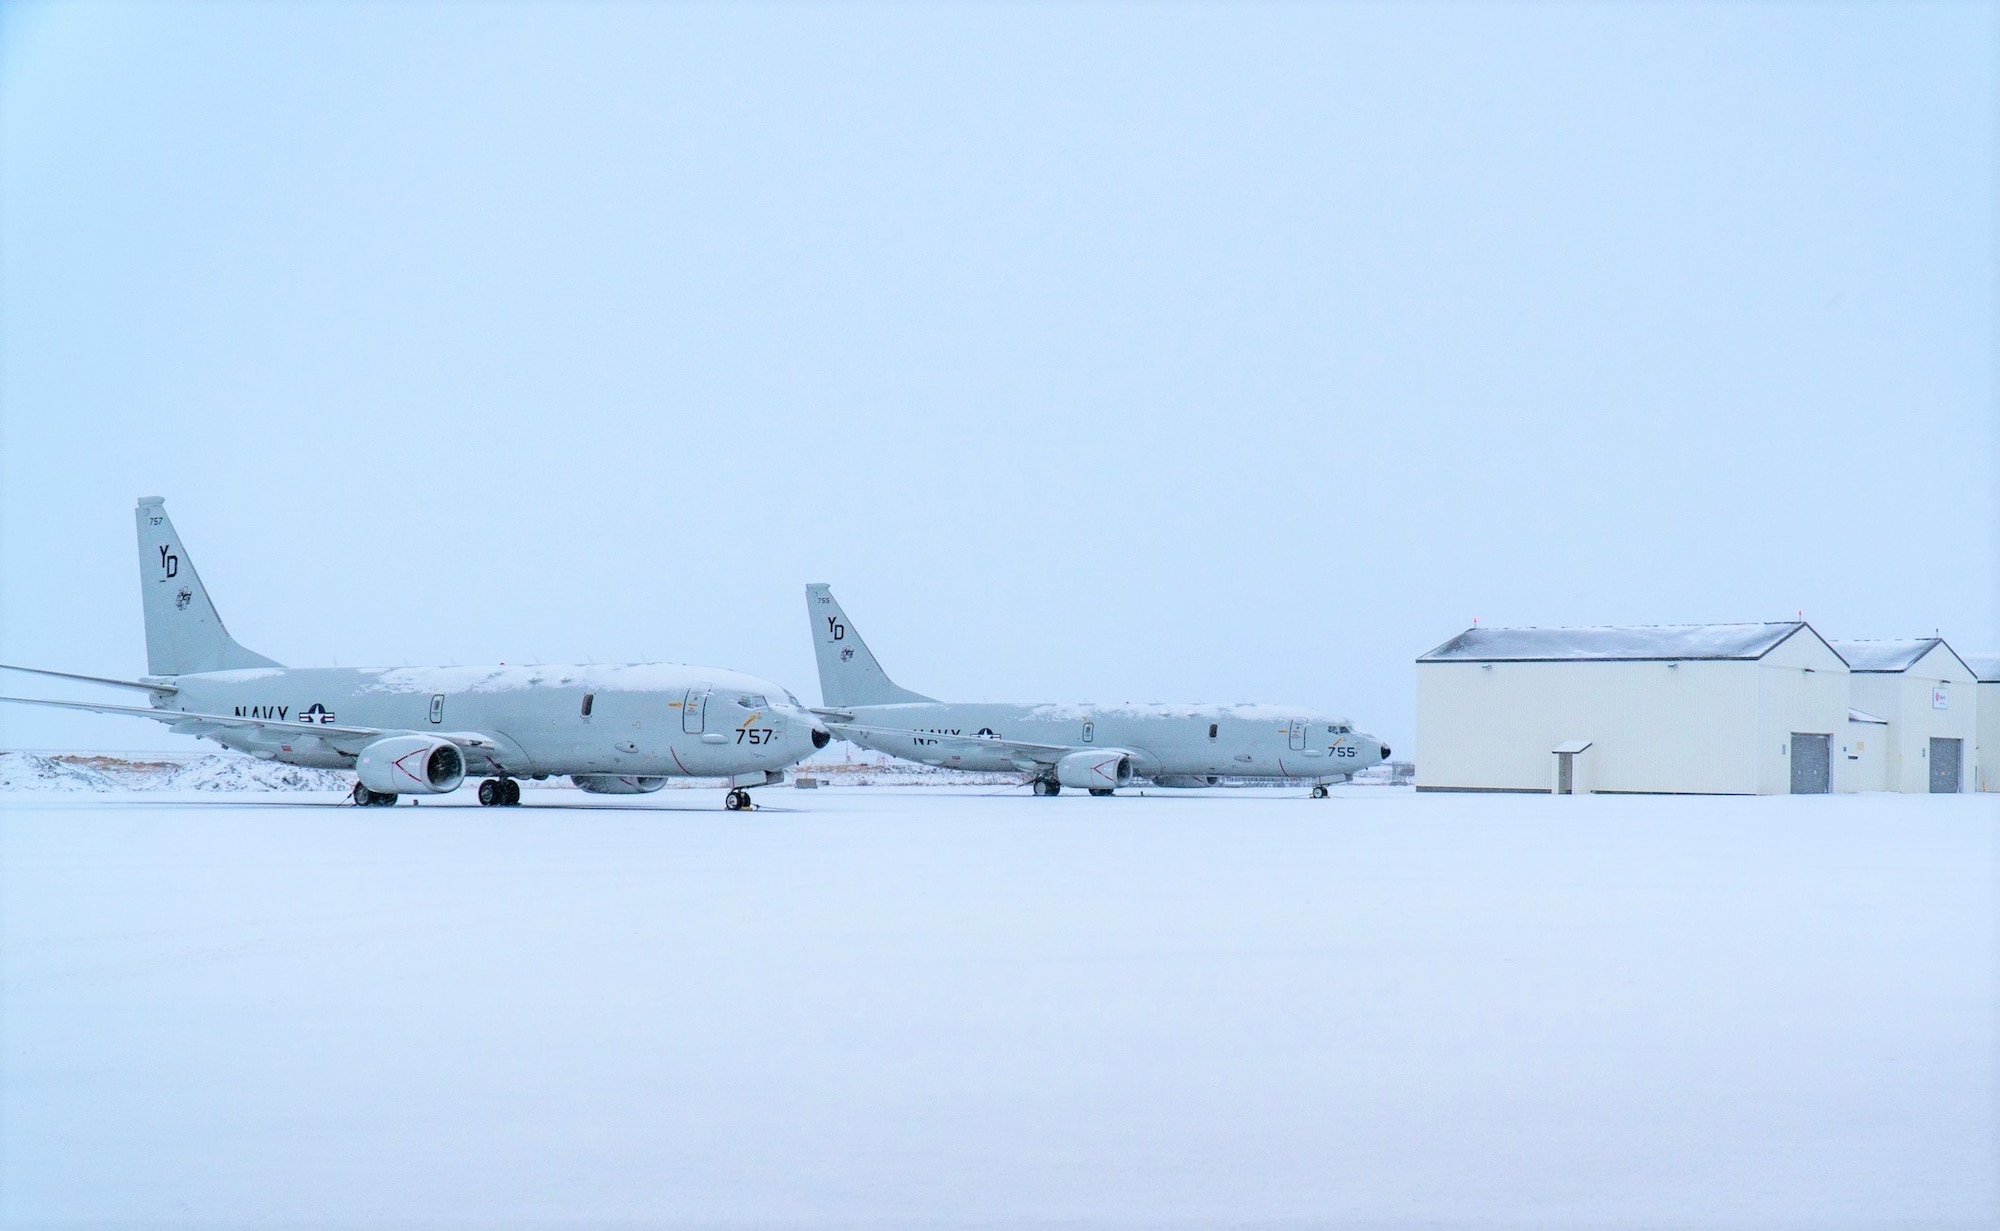 Two P-8A Poseidon maritime patrol and reconnaissance aircraft parked on the apron of Keflavik Air Base, Jan. 2, 2020.